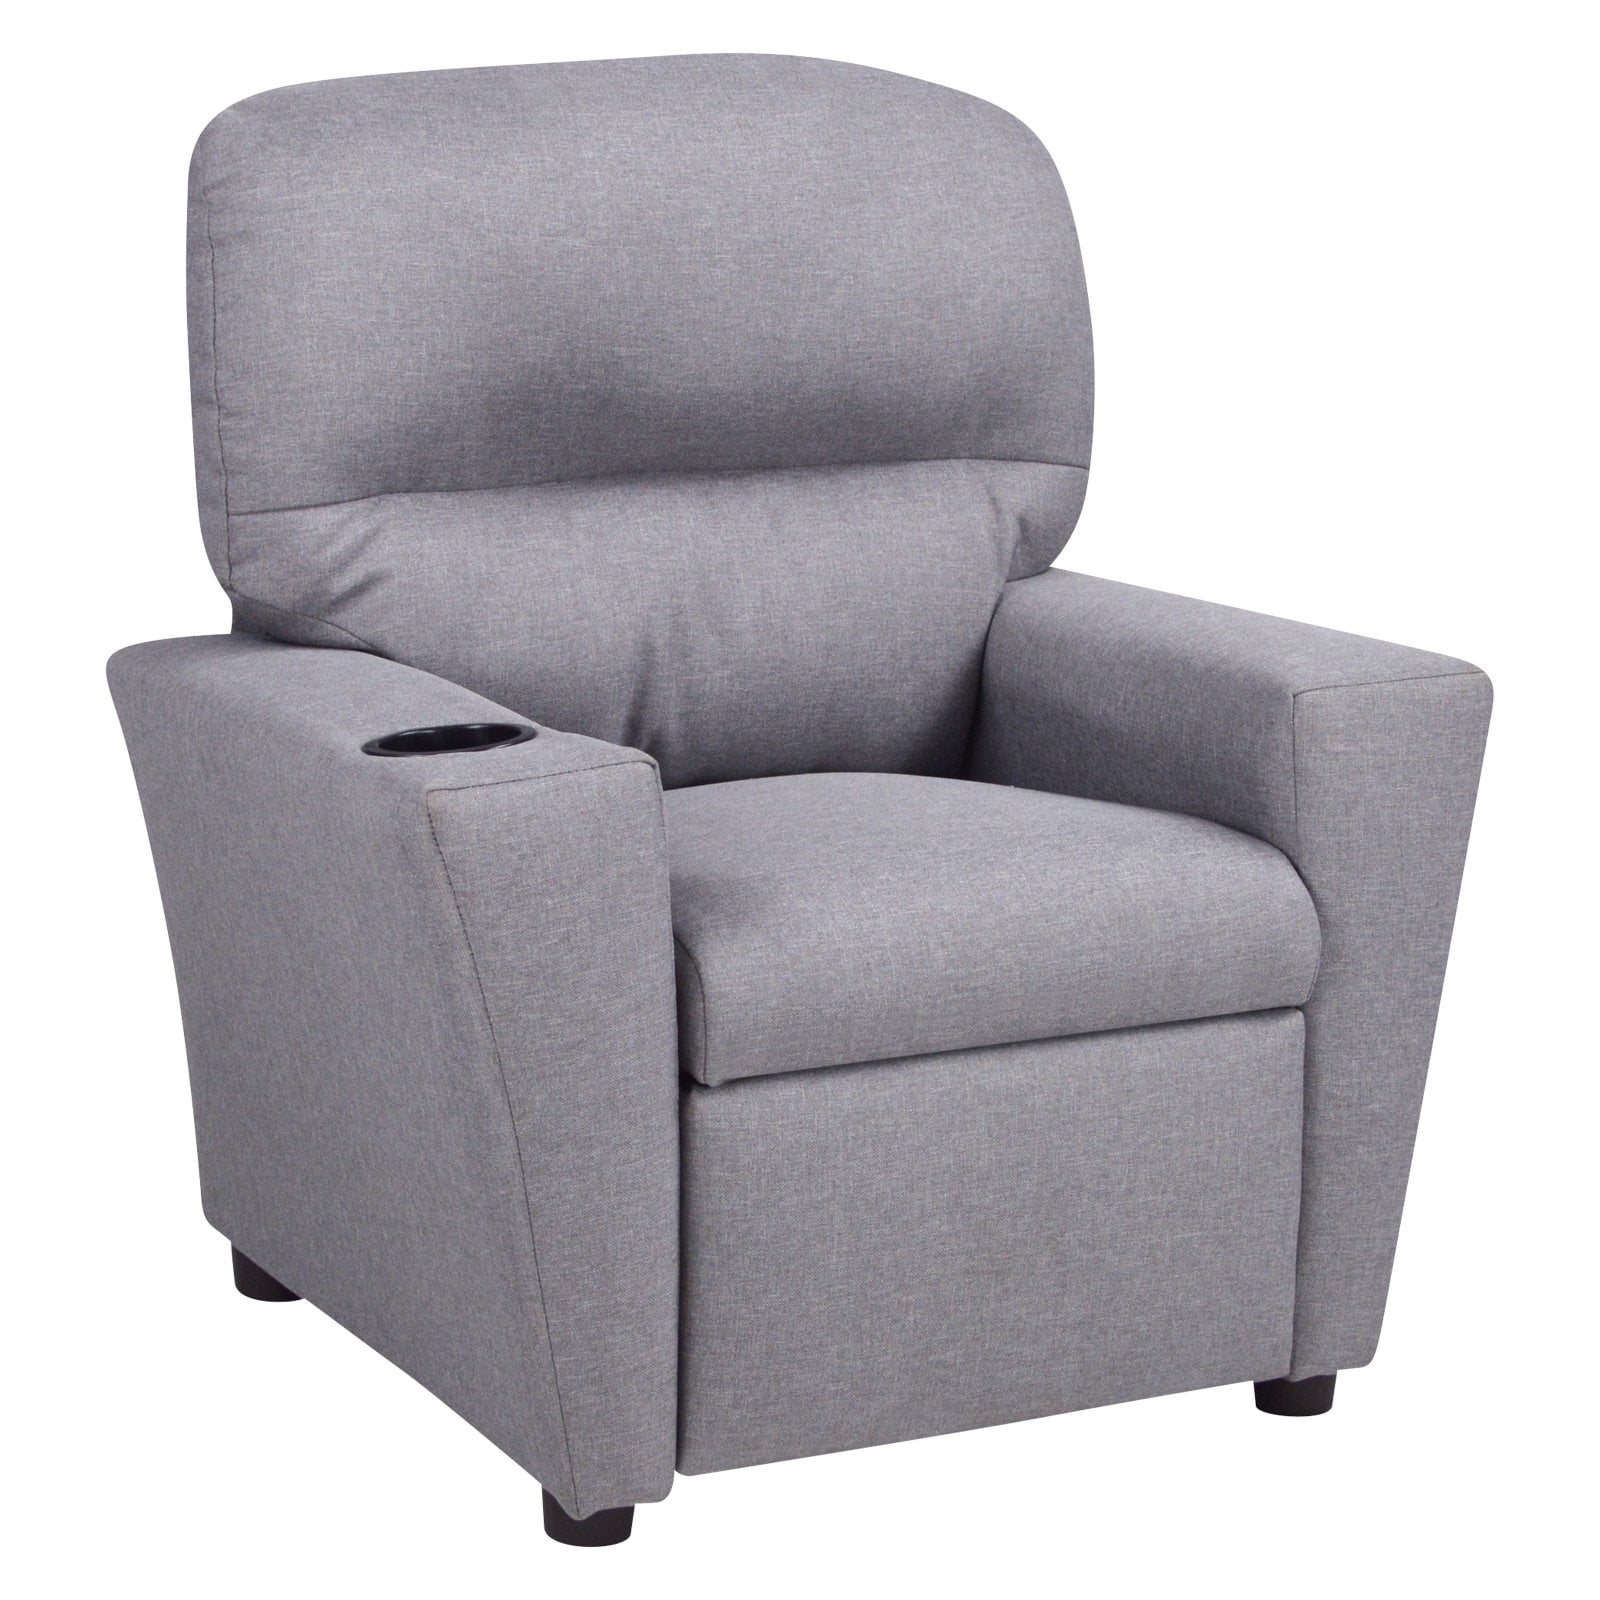 children's recliner with cup holder